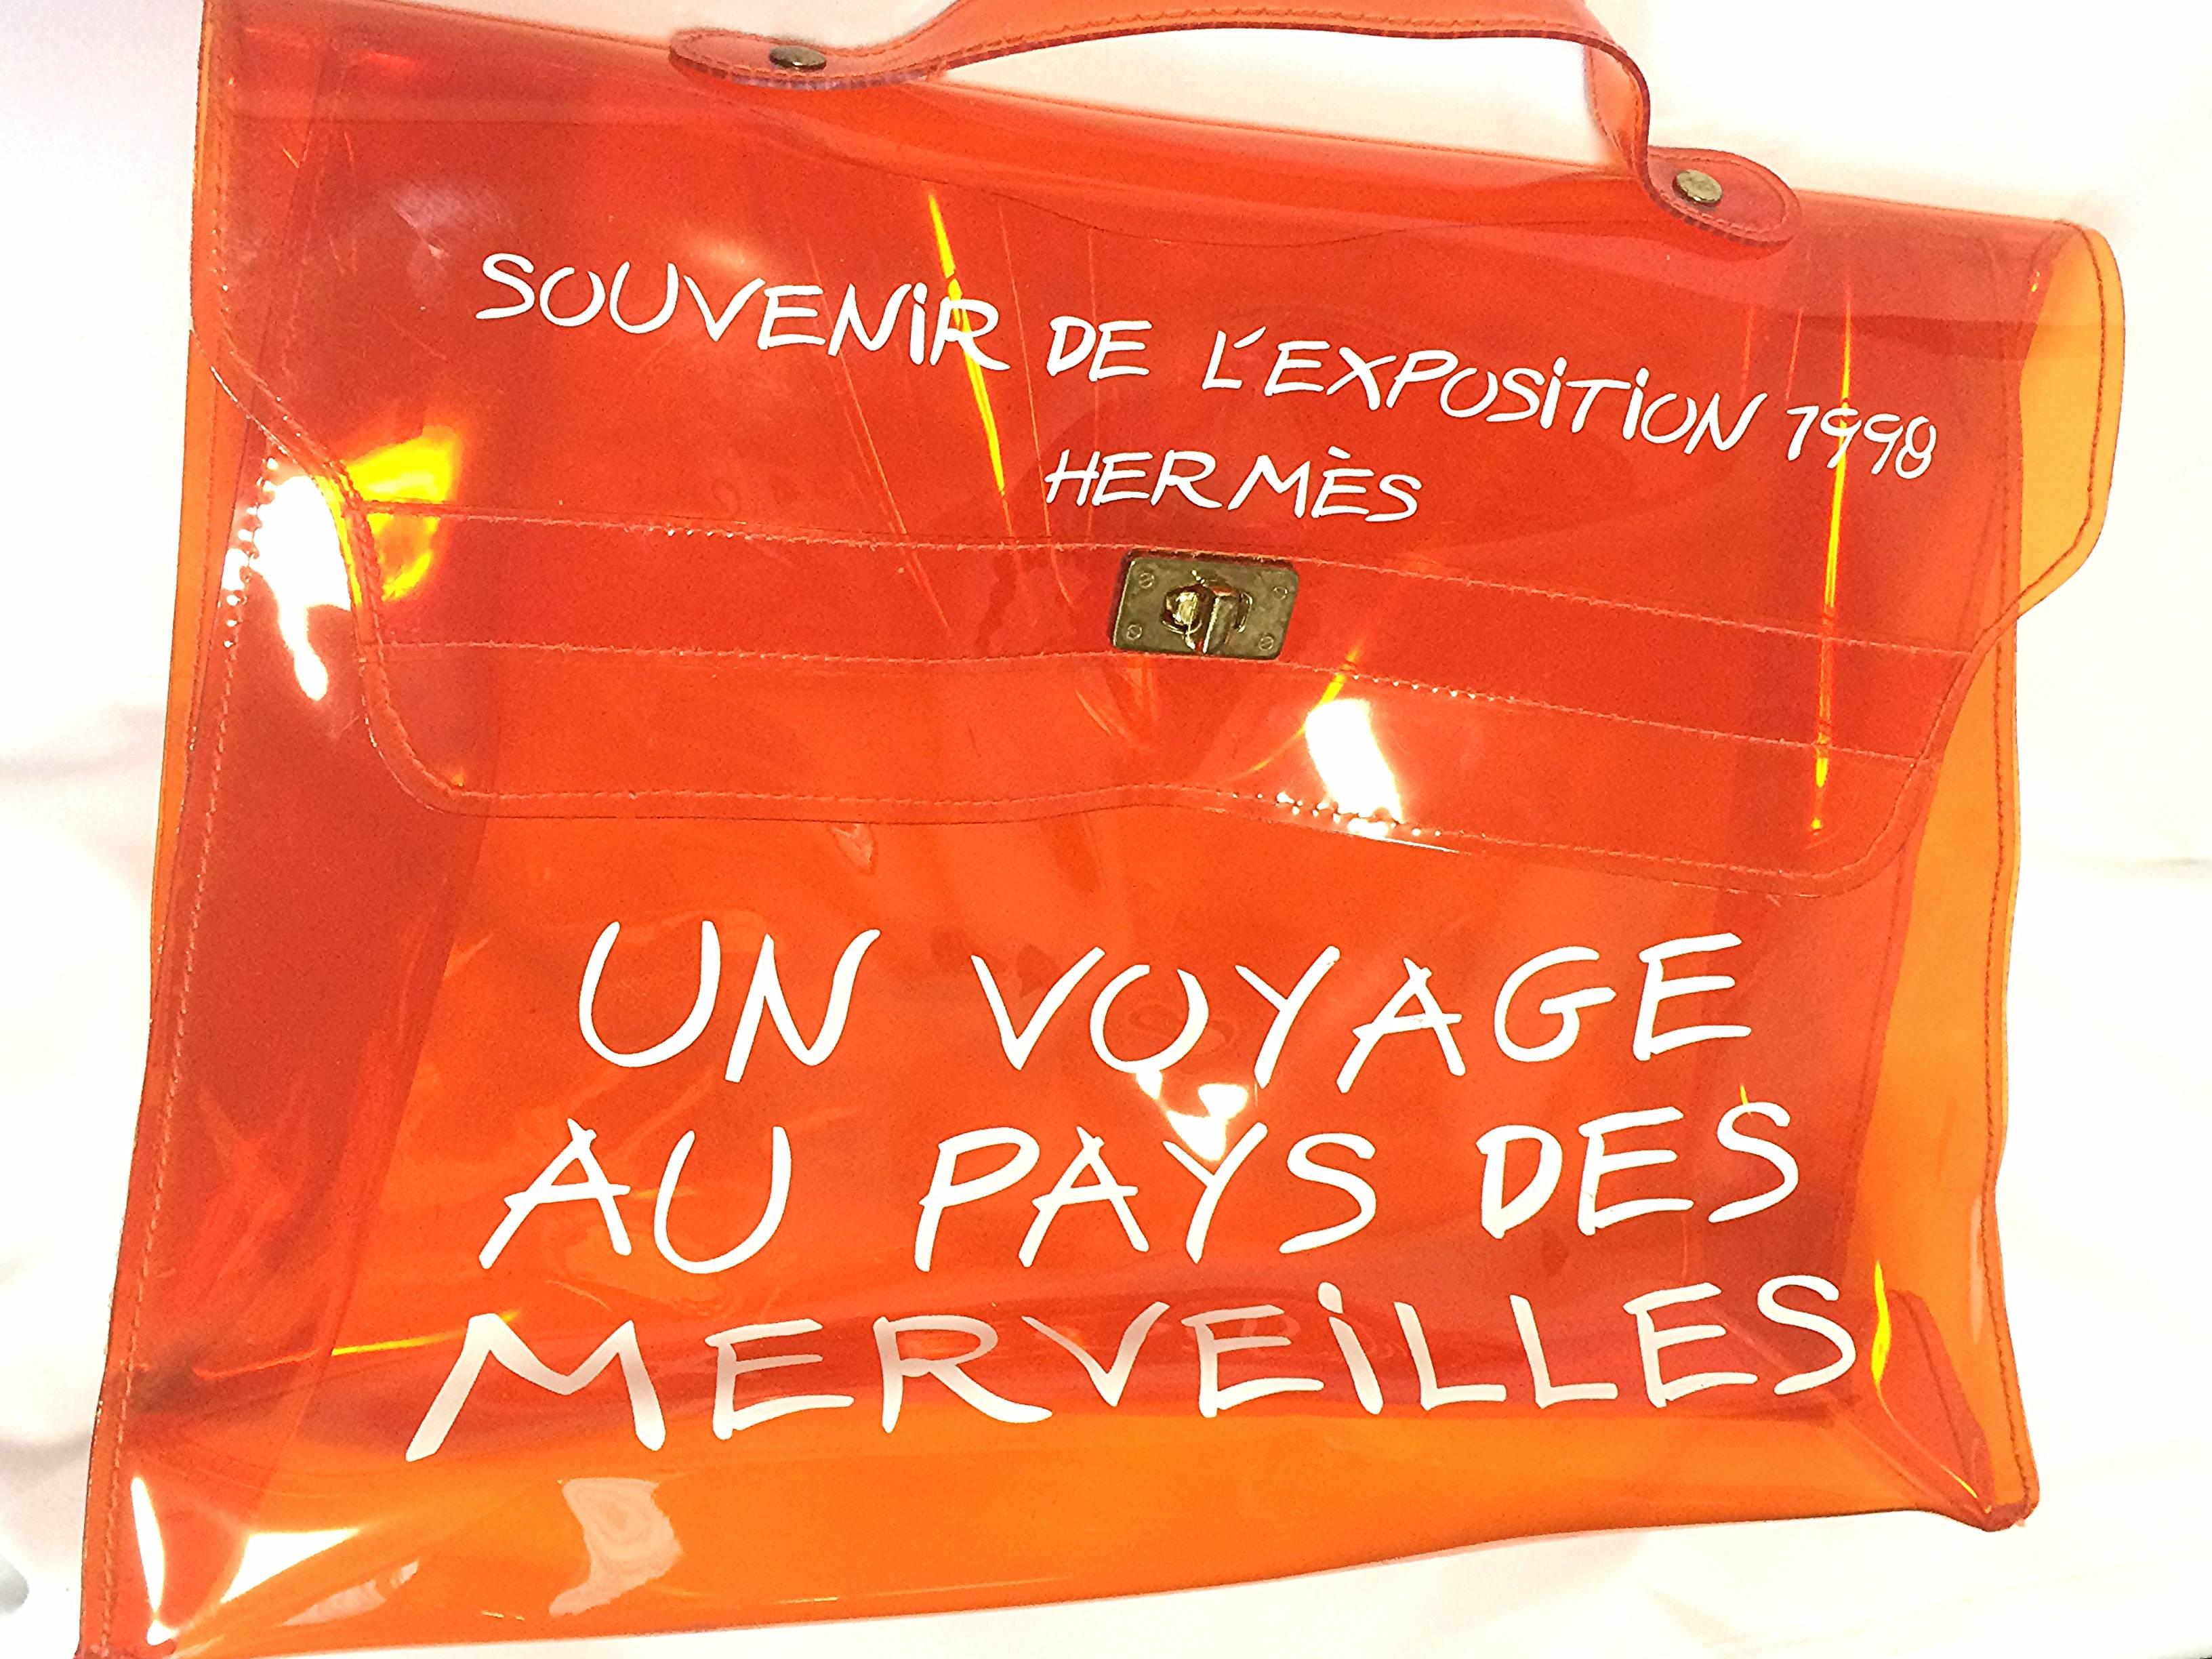 1998 Vintage Hermes a rare clear transparent orange vinyl Kelly bag Japan Limited Editio. Rare and collectible bag from 90's Hermes exhibition.

Vintage Hermes a rare transparent orange vinyl Kelly bag Japan Limited Edition, Japan Department